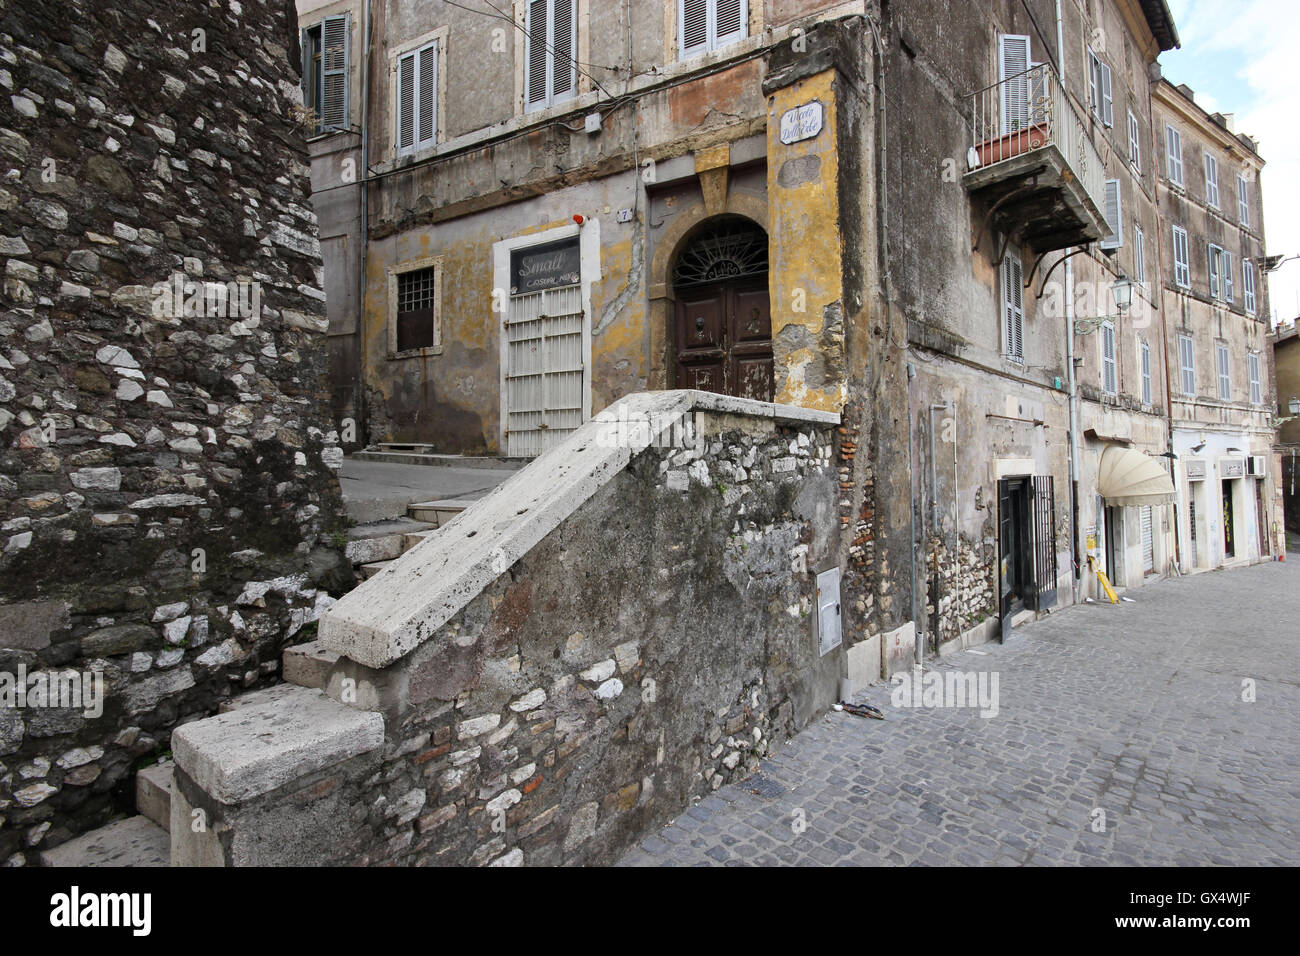 a view full of character of an old building in Tivoli, Italy Stock Photo